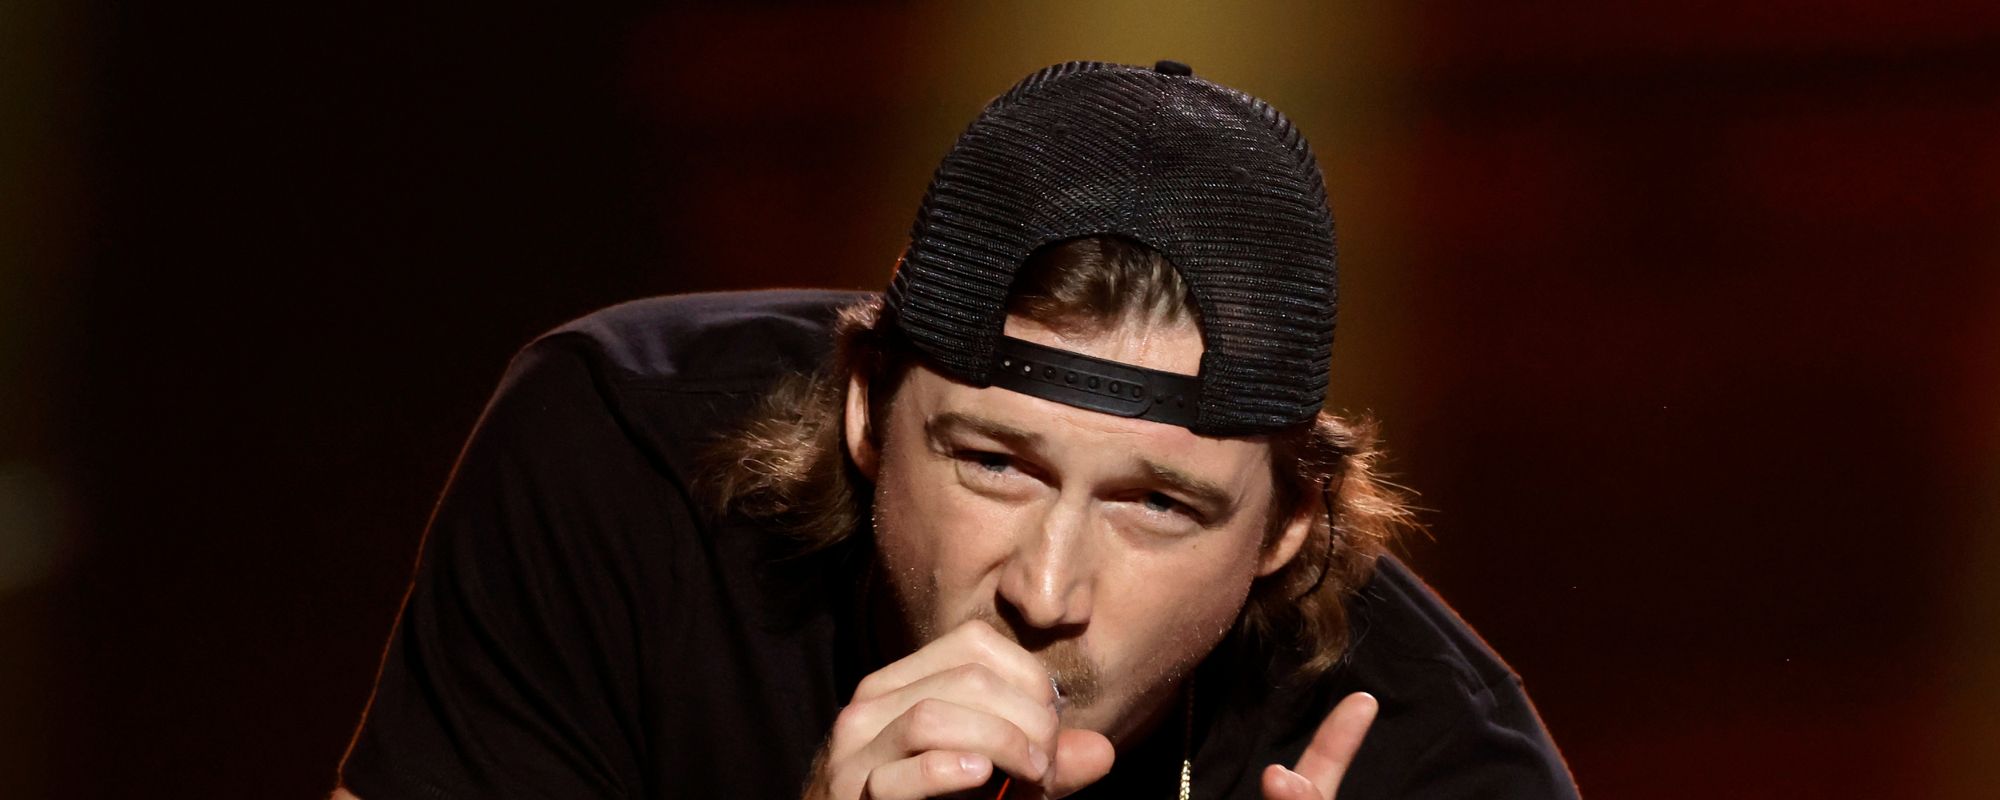 Resurfaced Morgan Wallen ‘The Voice’ Audition Shows Why He Belongs in Nashville, Fans Say